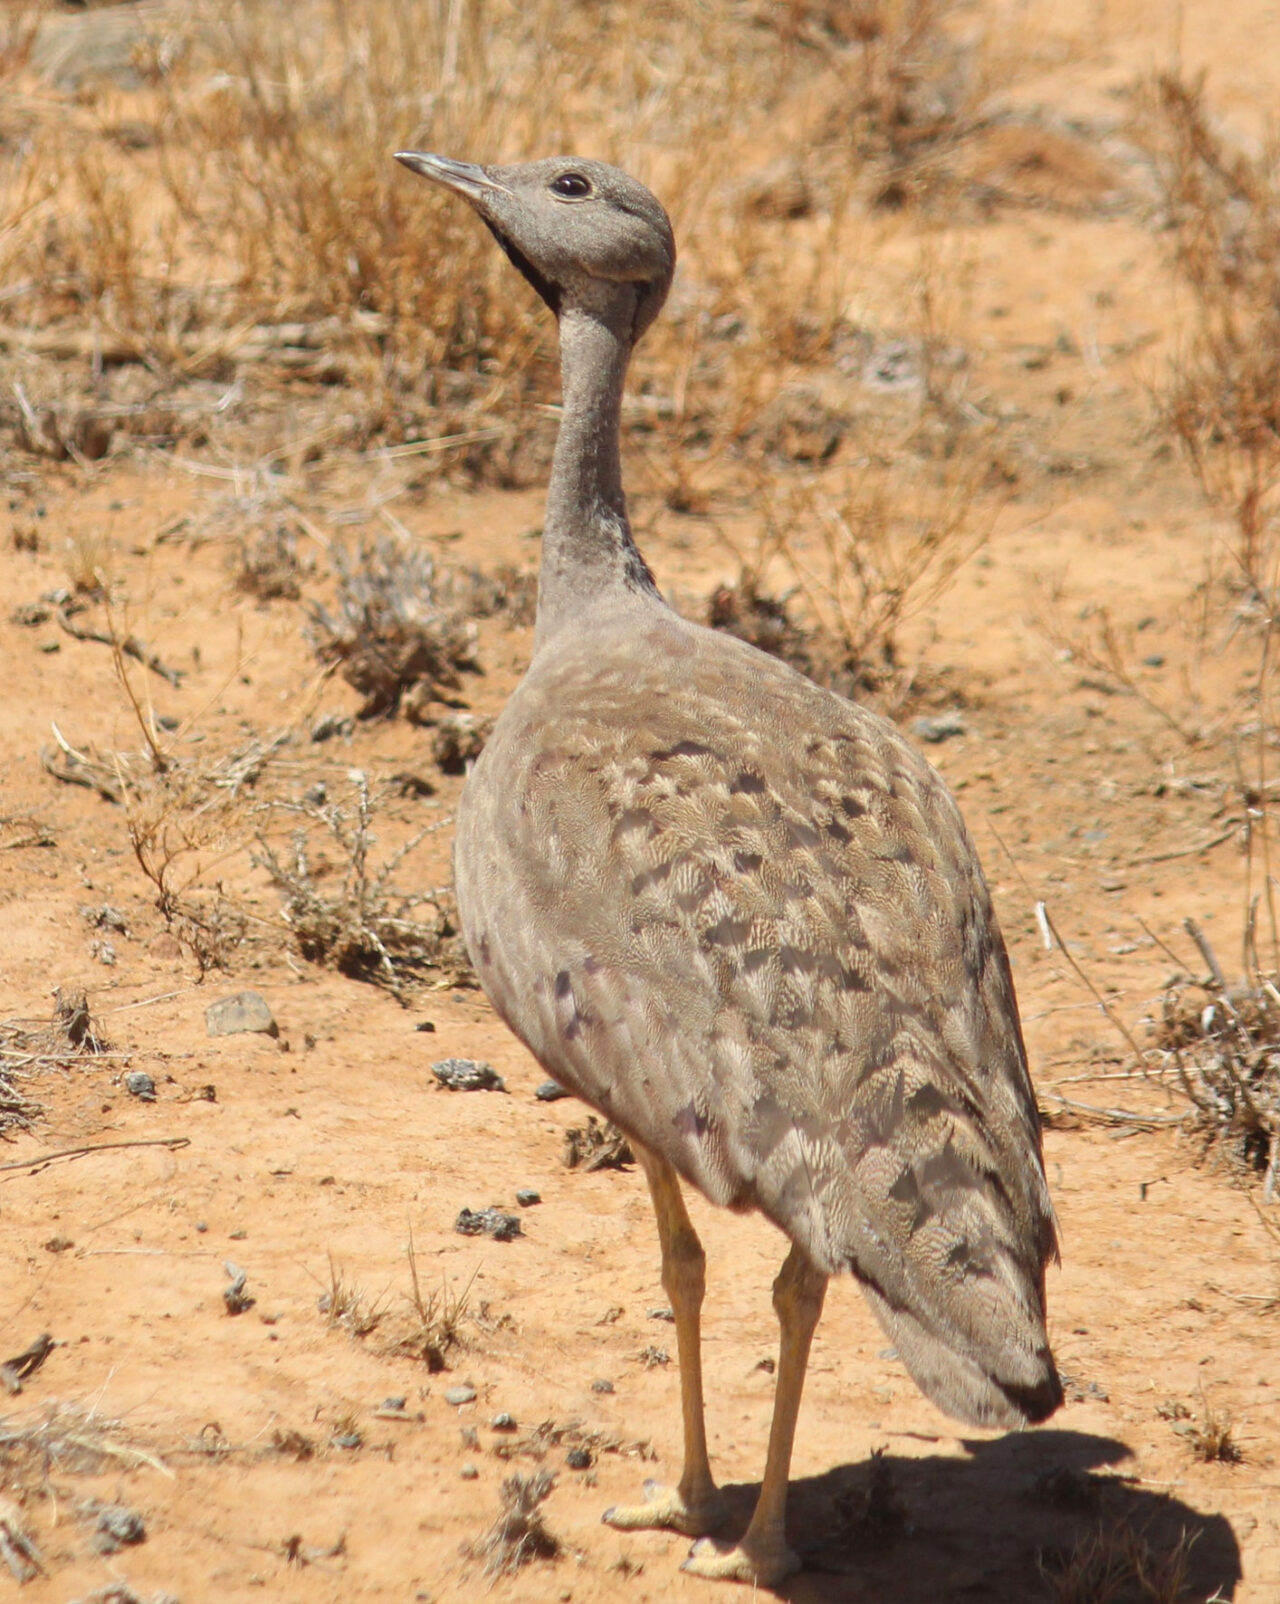 buff colored bird with long neck stands in a sandy desert.